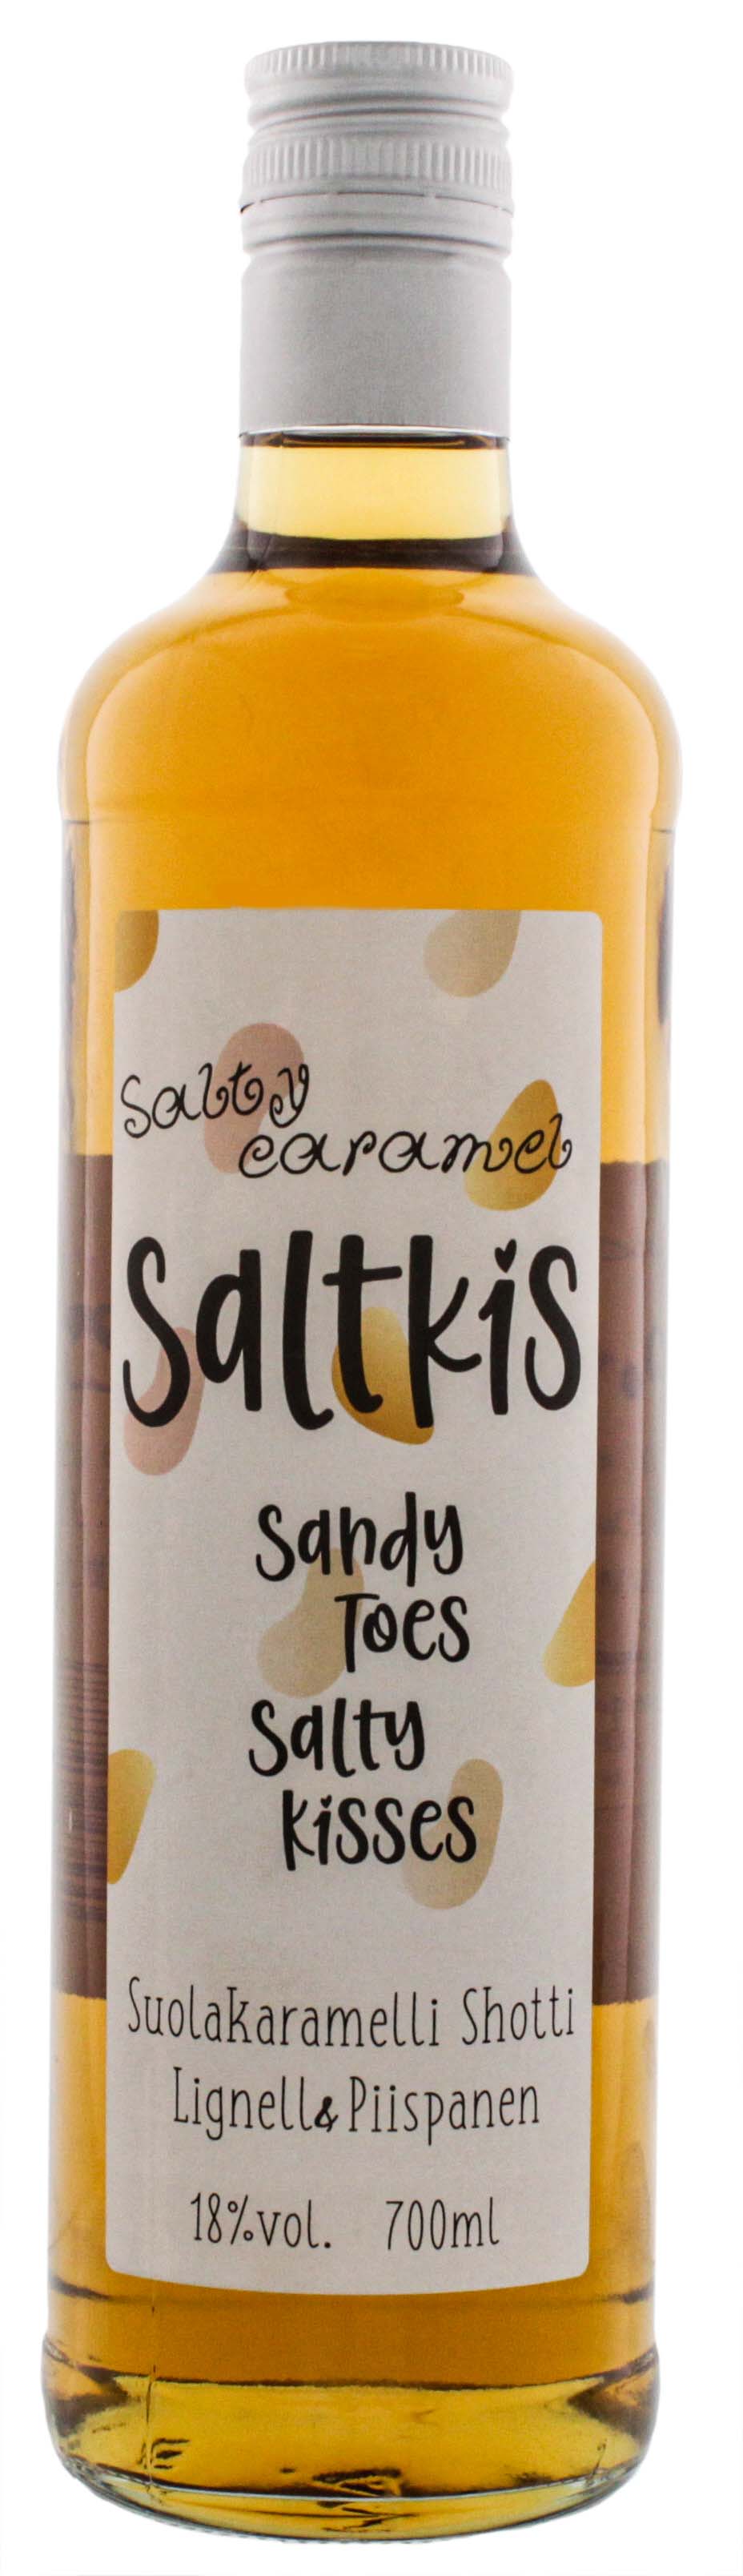 Saltkis Salty Caramel Sandy Toes and Salty Kisses 0,7L